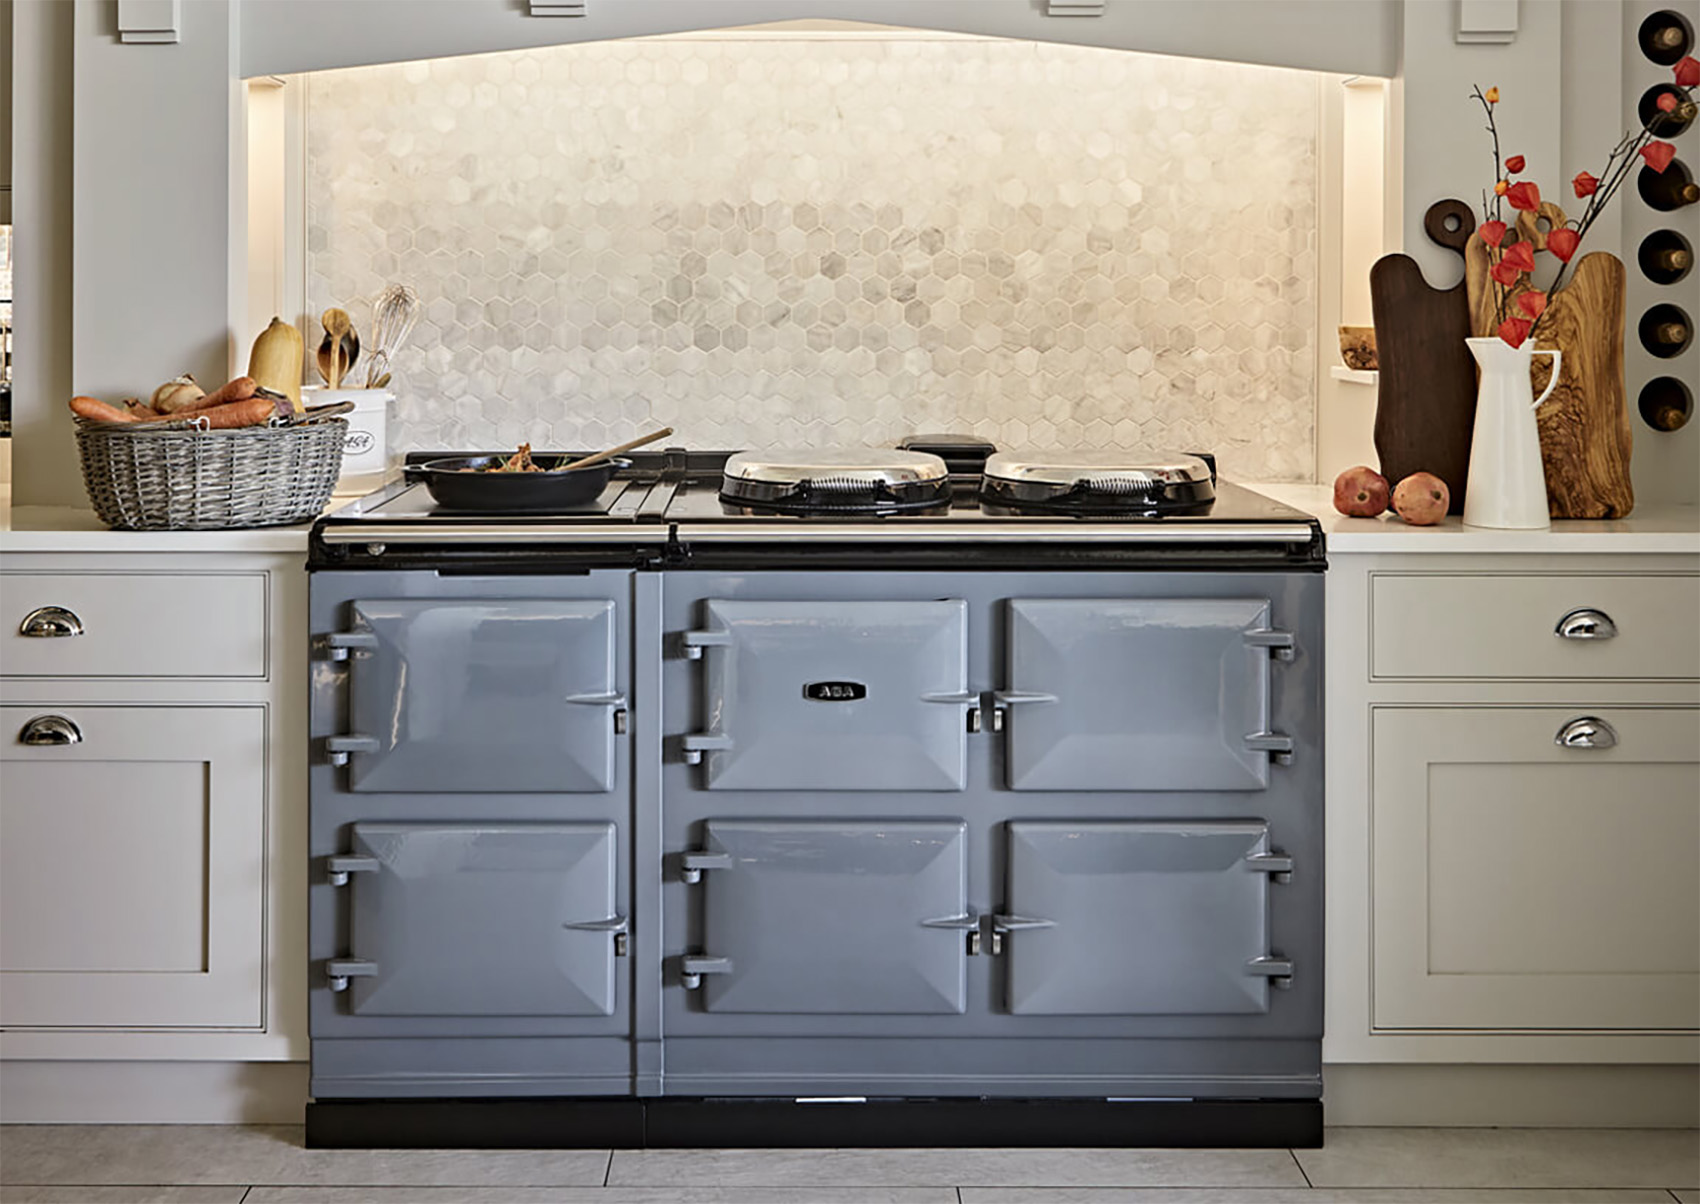 why are AGA ranges so expensive - classic cast iron 1.0